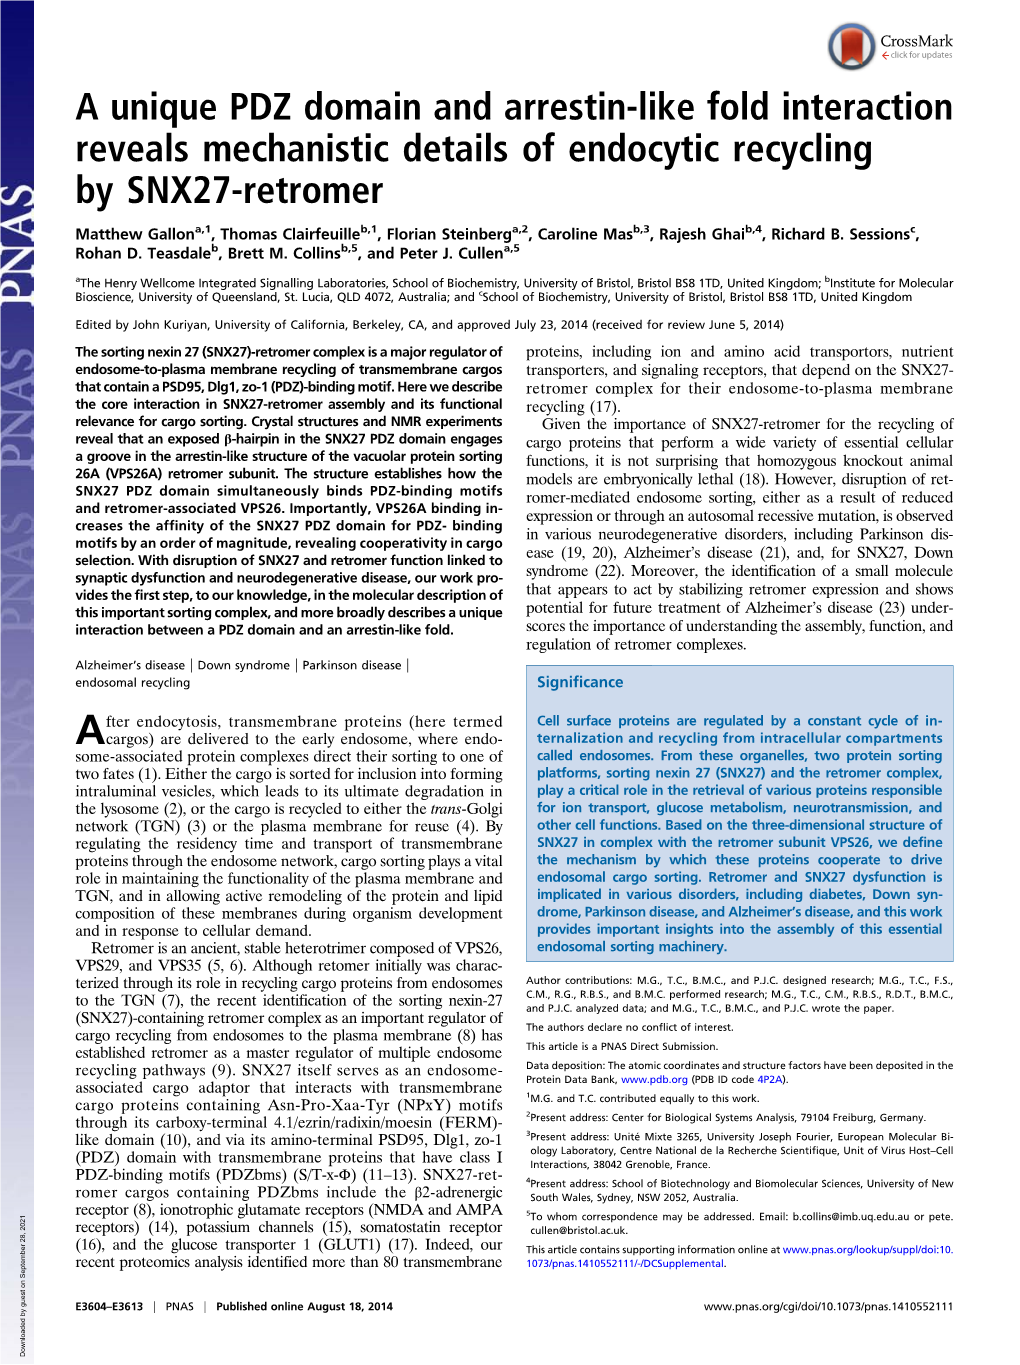 A Unique PDZ Domain and Arrestin-Like Fold Interaction Reveals Mechanistic Details of Endocytic Recycling by SNX27-Retromer